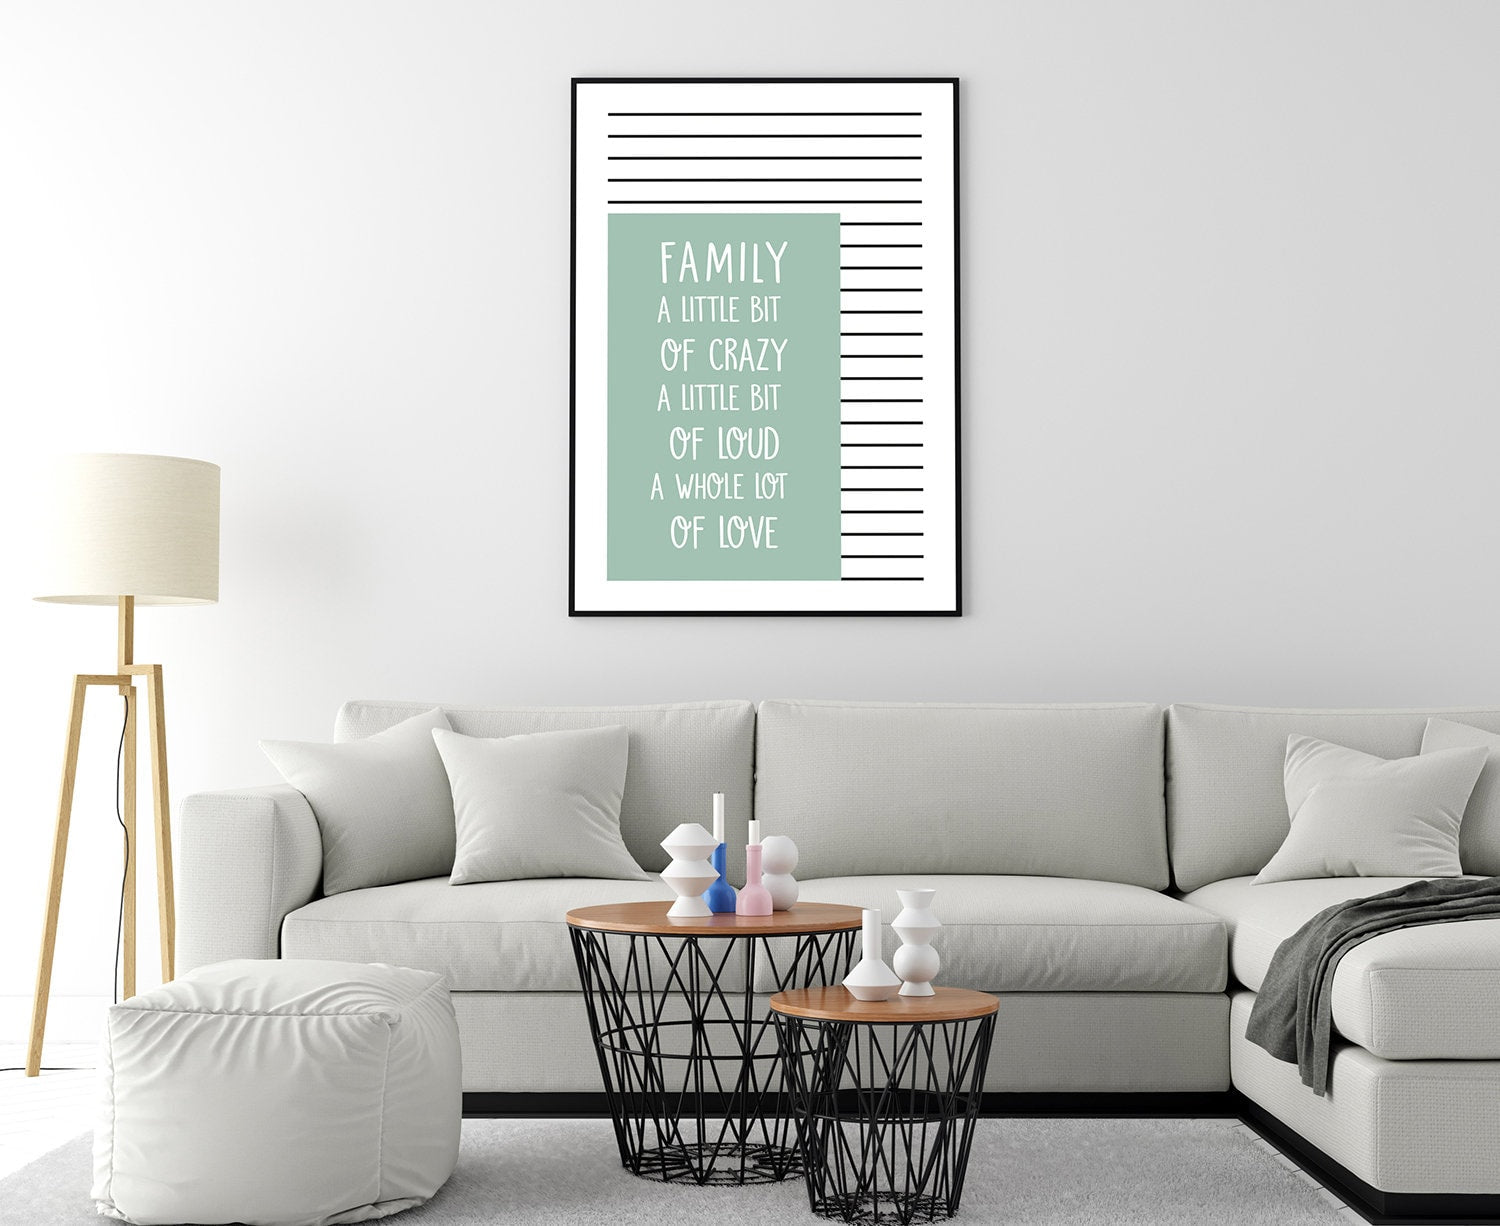 FAMILY a little bit of crazy, a little bit of loud.. Love poster, Family Quote, Living room wall decor, Poster print, Living room wall art